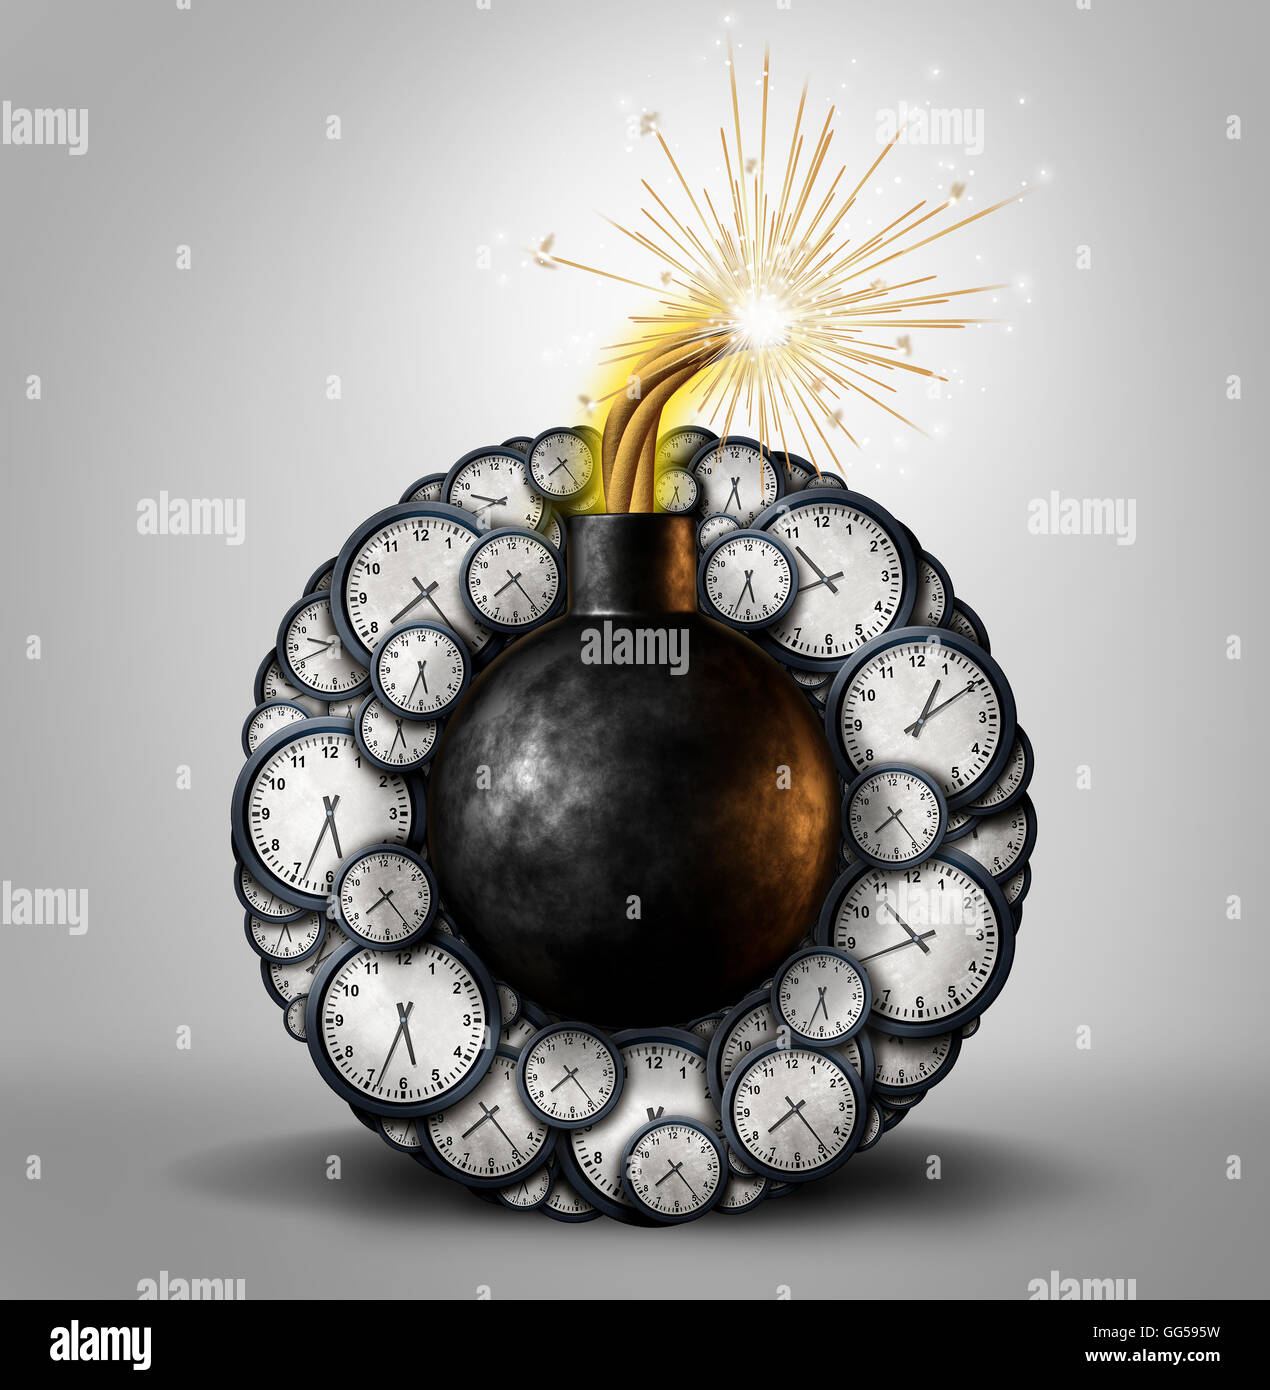 Time bomb business deadline concept as an explosive device surrounded by clock timer objects as an urgent stressful scheduling or countdown metaphor as a 3D illustration. Stock Photo